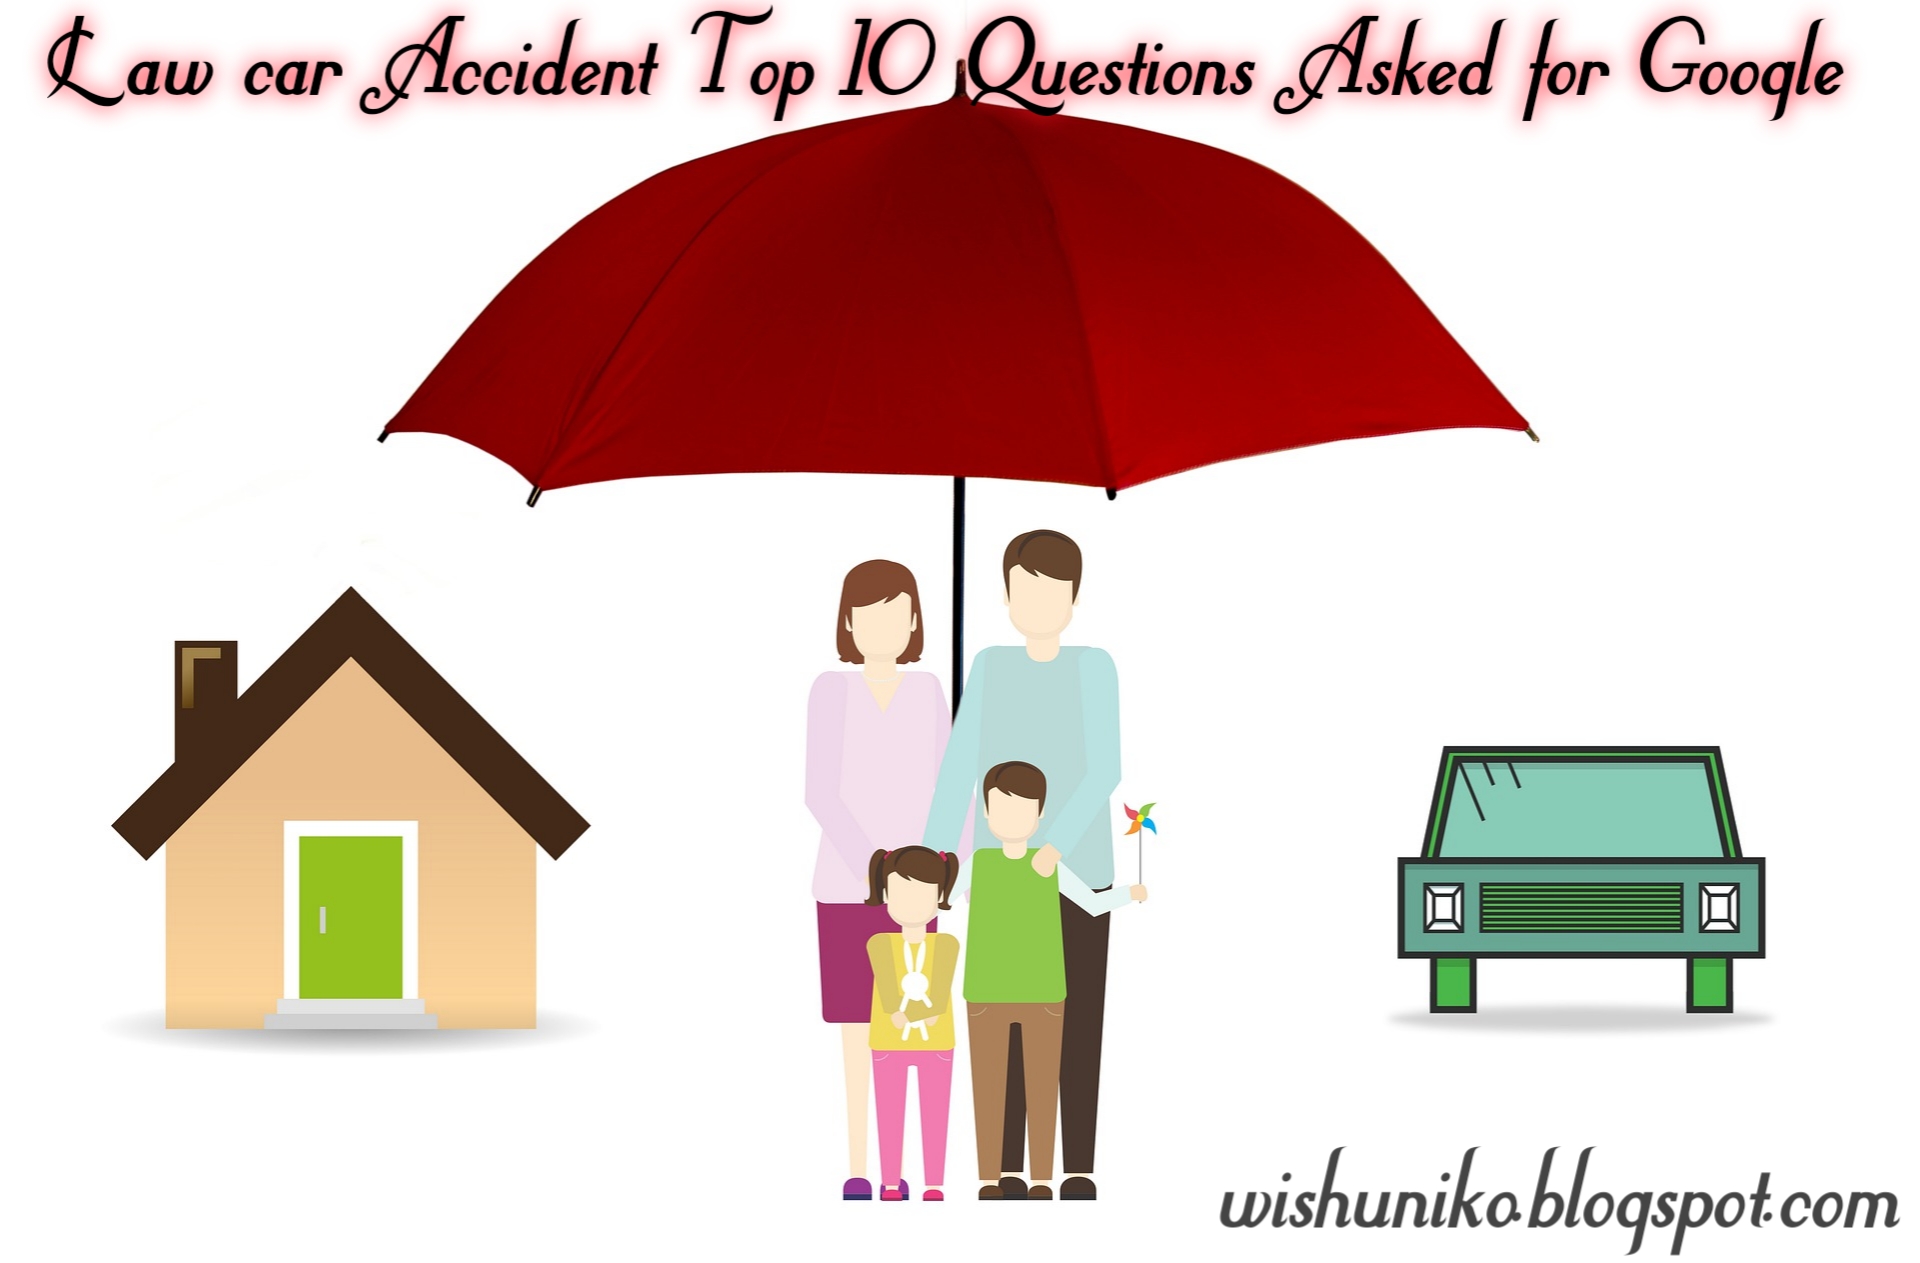 Law car Accident Top 10 Questions Asked for Google